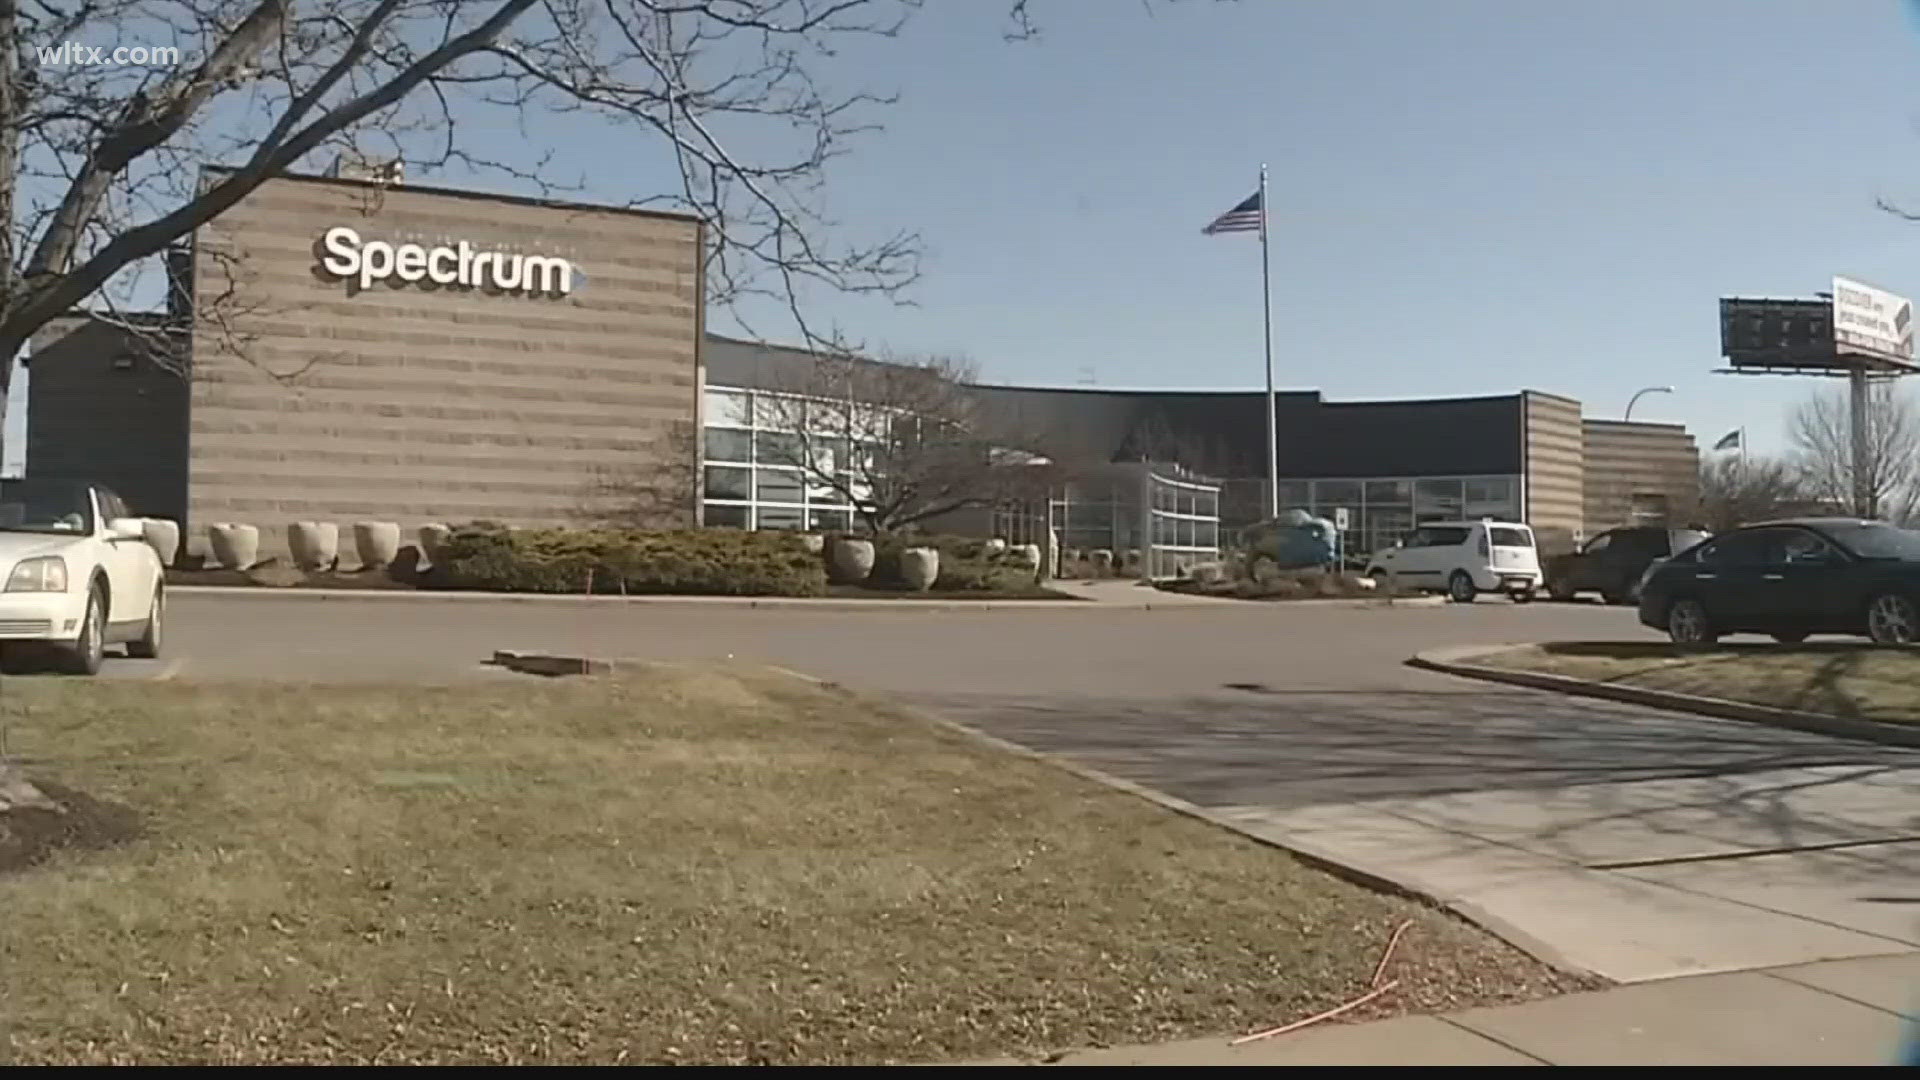 Spectrum has announced they will be expanding their services in Calhoun county thanks to a $5B investment.